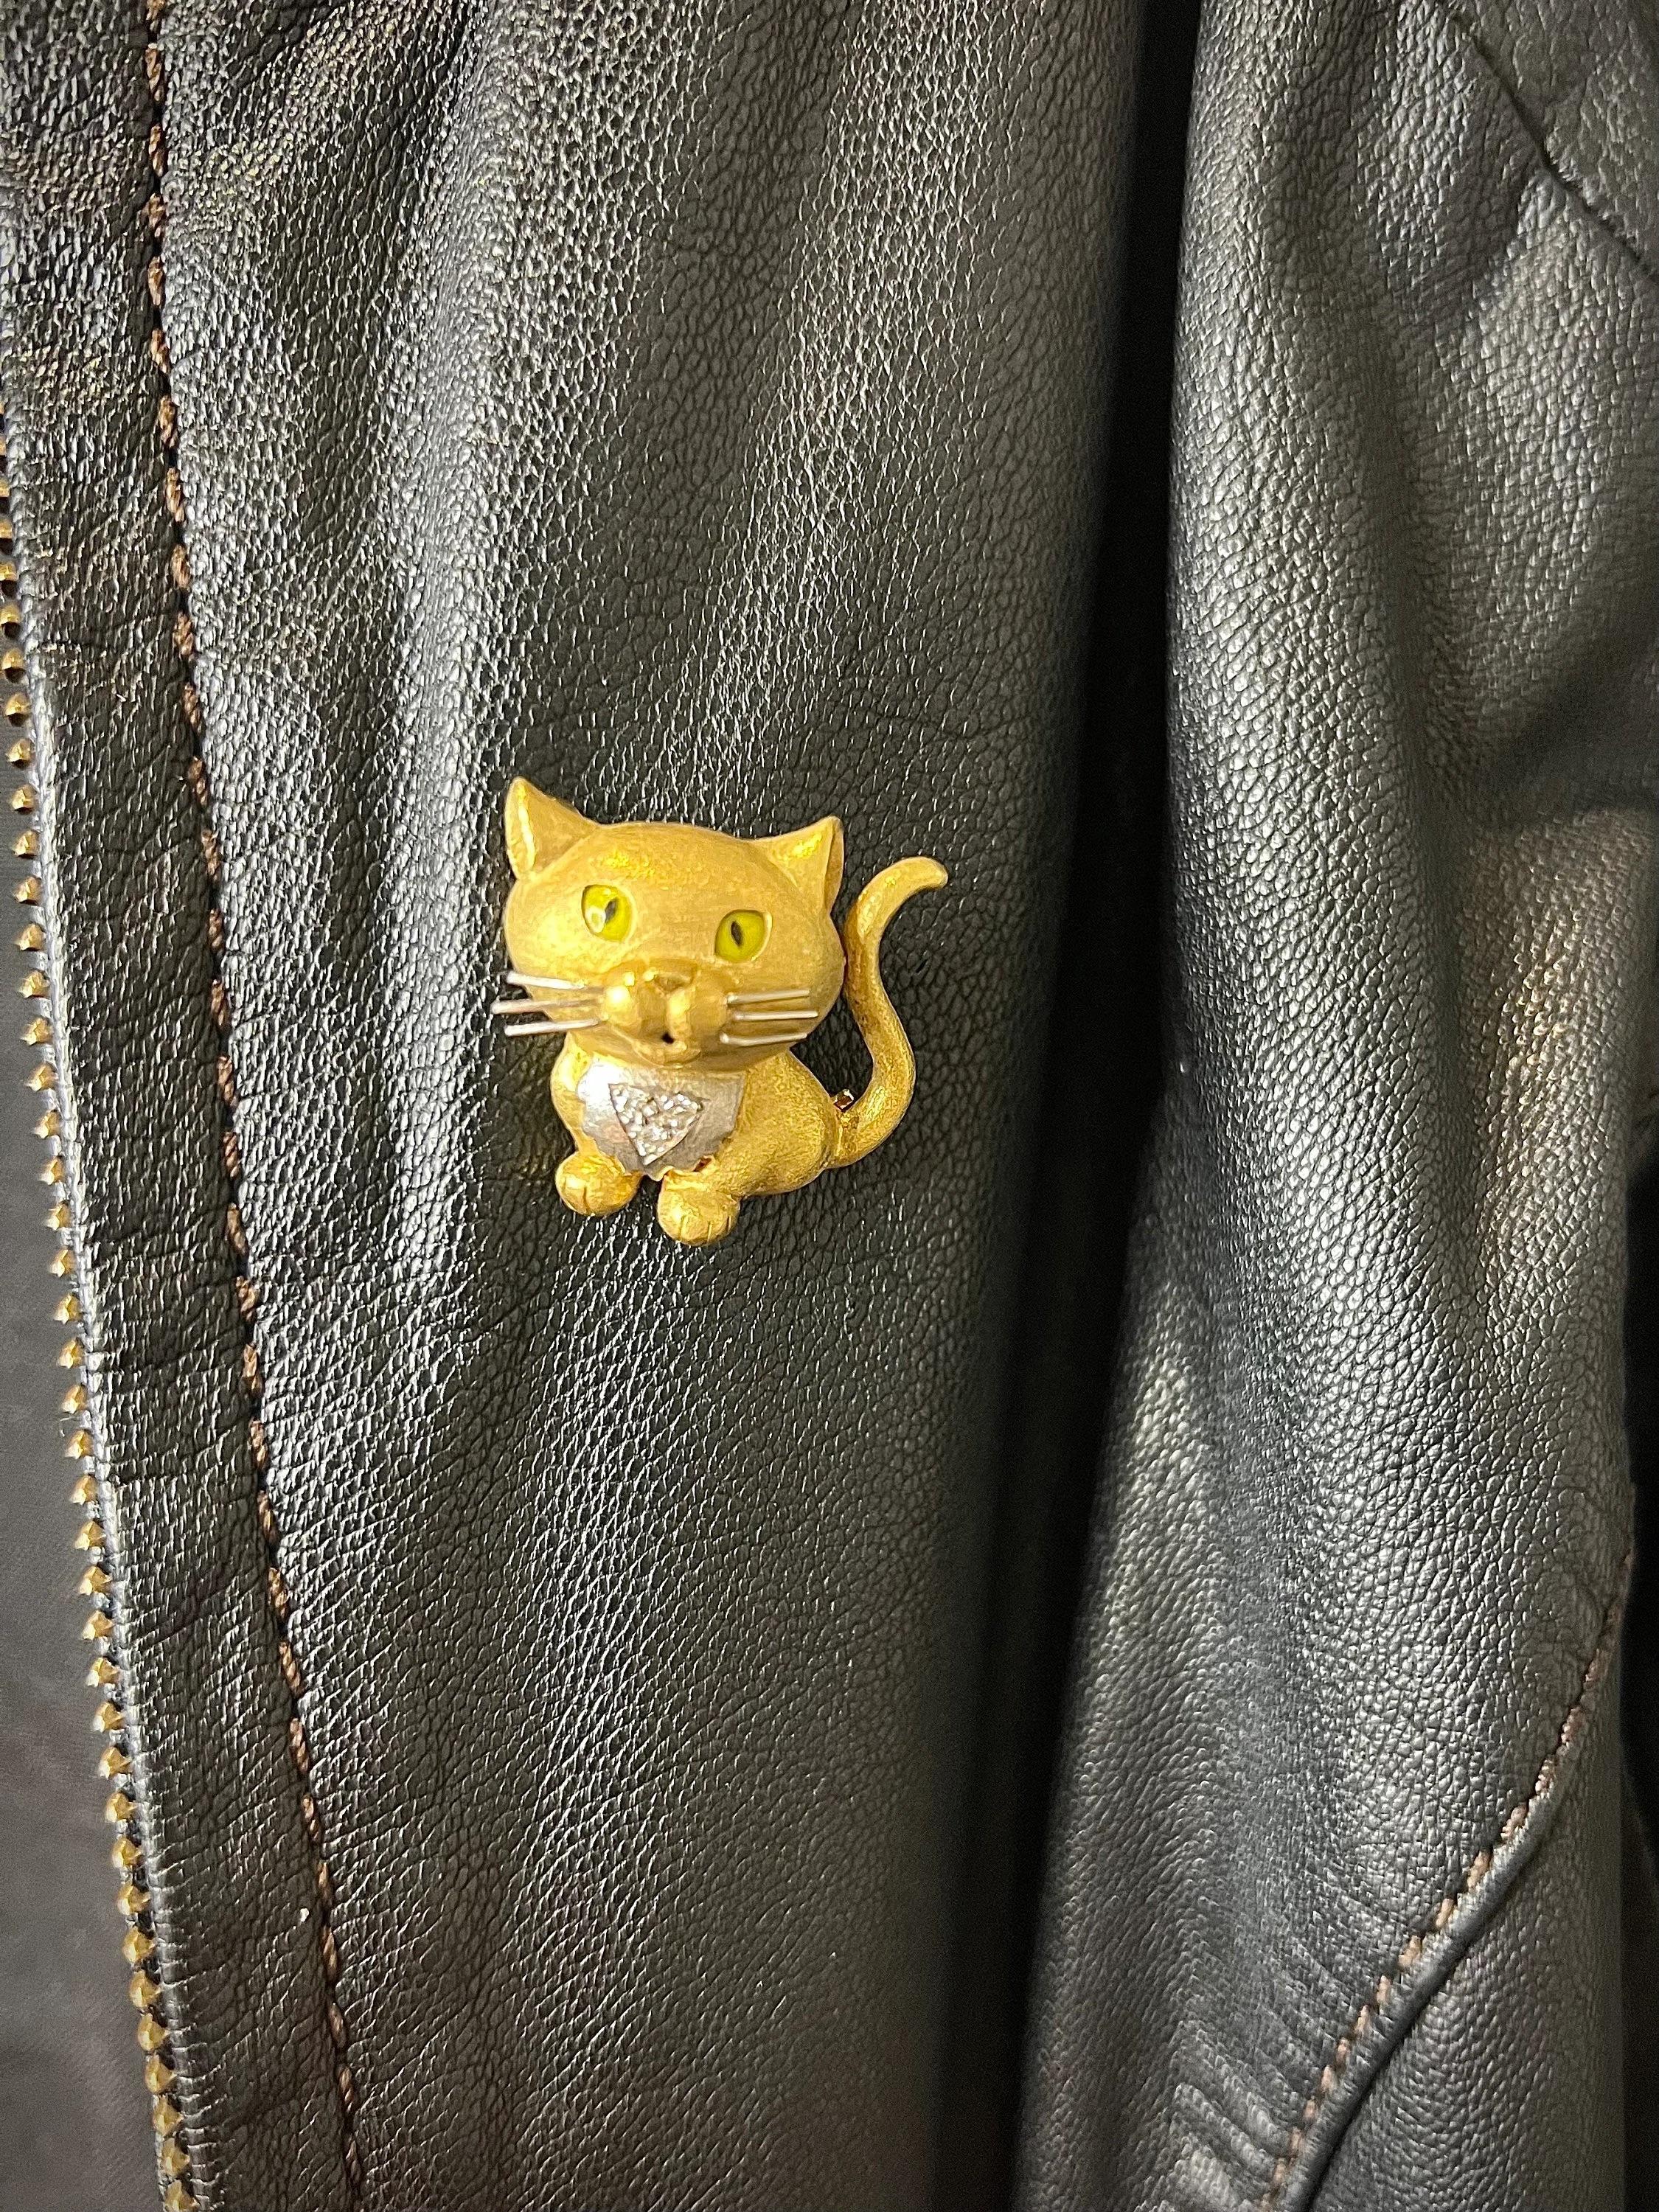 Vintage Cat Brooch

18ct Gold Stamped 750

Circa 1980s

Makers Mark E W & Co

Indulge in a piece of vintage elegance with this 18ct yellow matt gold cat brooch. The brooch boasts yellow enamel eyes and white gold whiskers that add a touch of